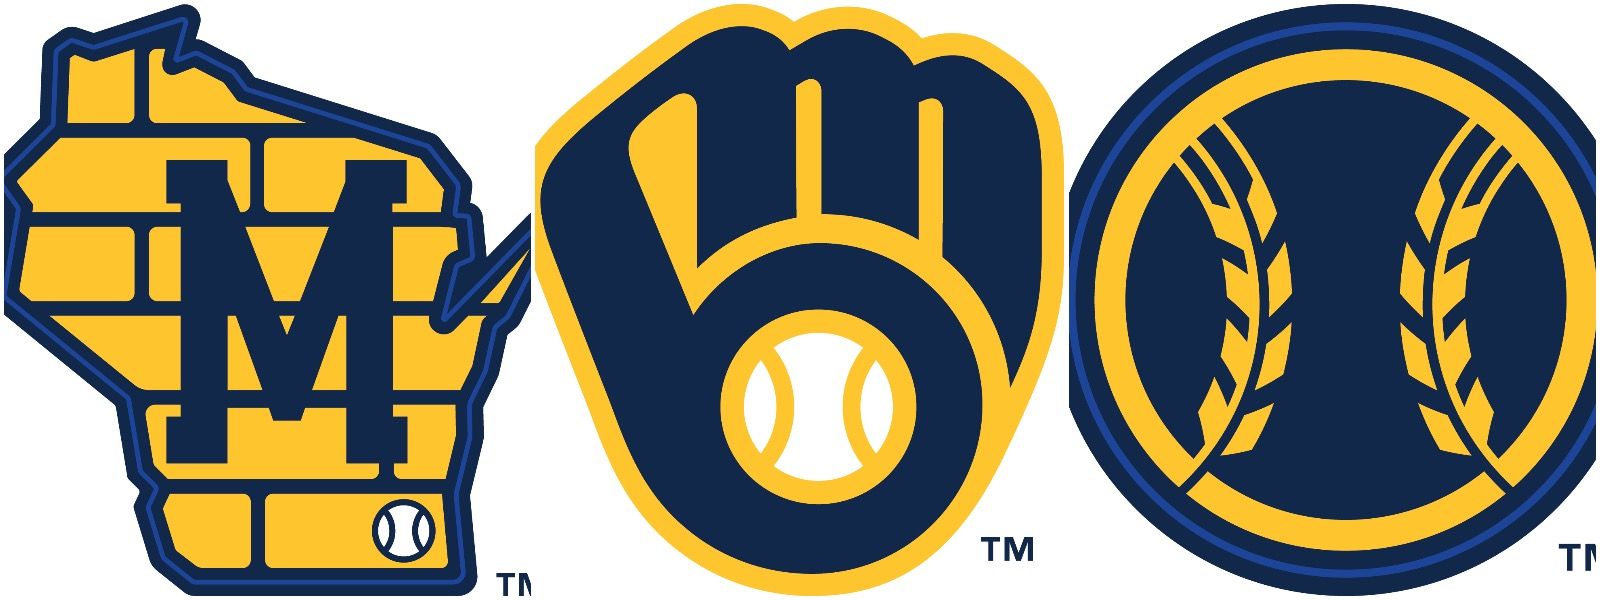 Old Meets New: The Brewers Unveil Their New Retro Inspired Logos, Uniforms